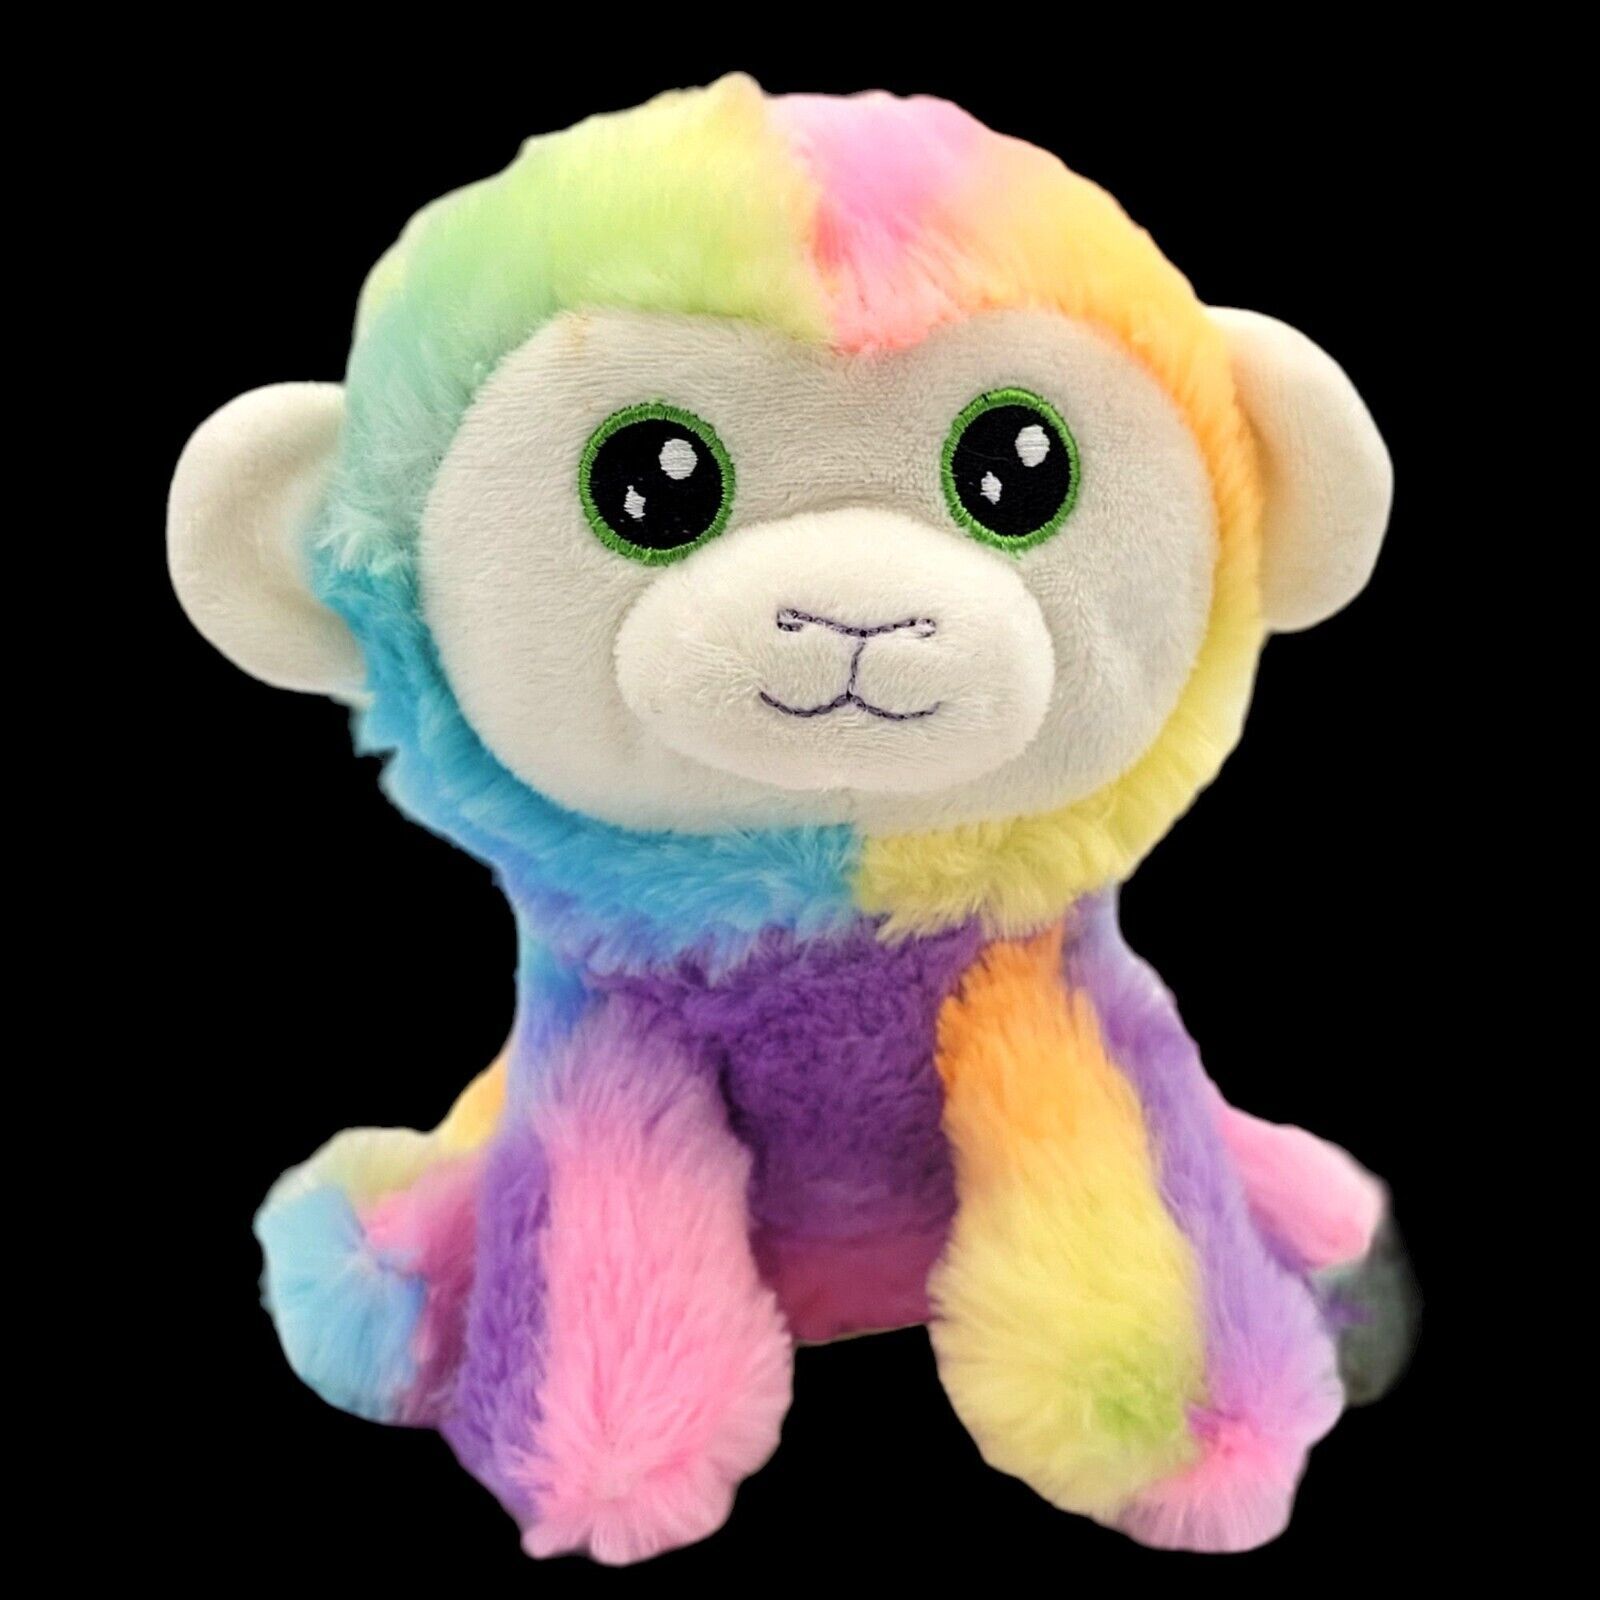 Animal Adventure Colorful Friends Monkey 7" Soft Eyes Pastels 2019 Easter Spring - $14.20